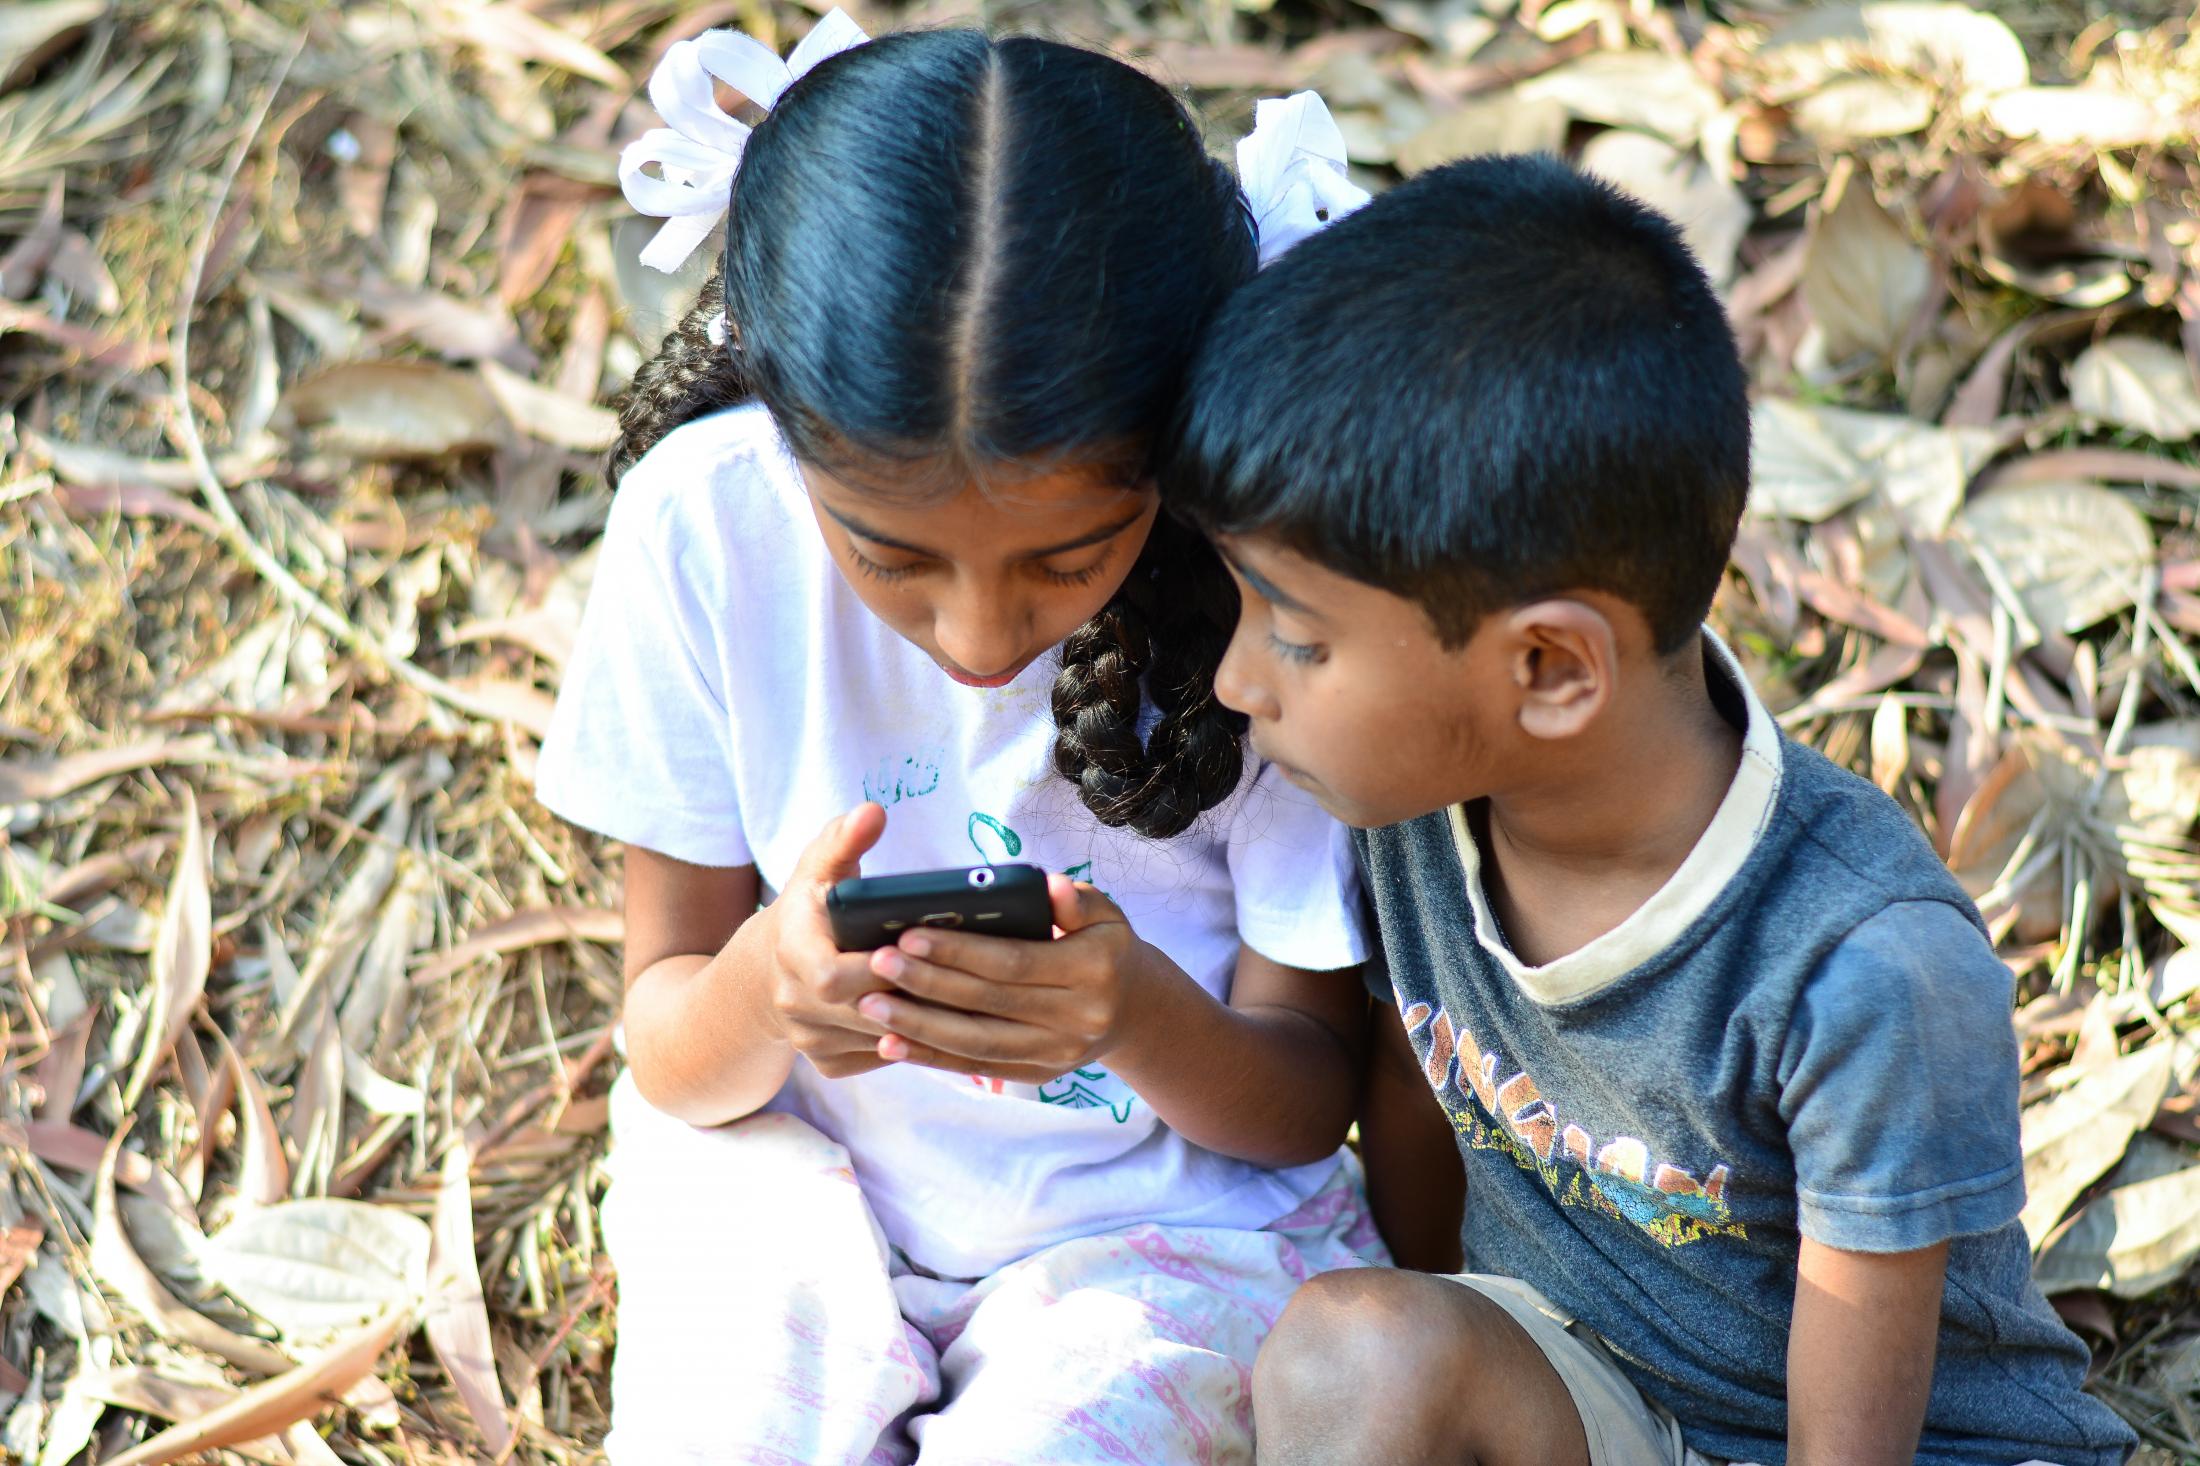 Swami&rsquo;s daughter Rashmi and son Vinay playing games on a phone after returning from school. Swamy is very fond of education. He could not complete graduation due to circumstances at home but hopes to provide his children with it.